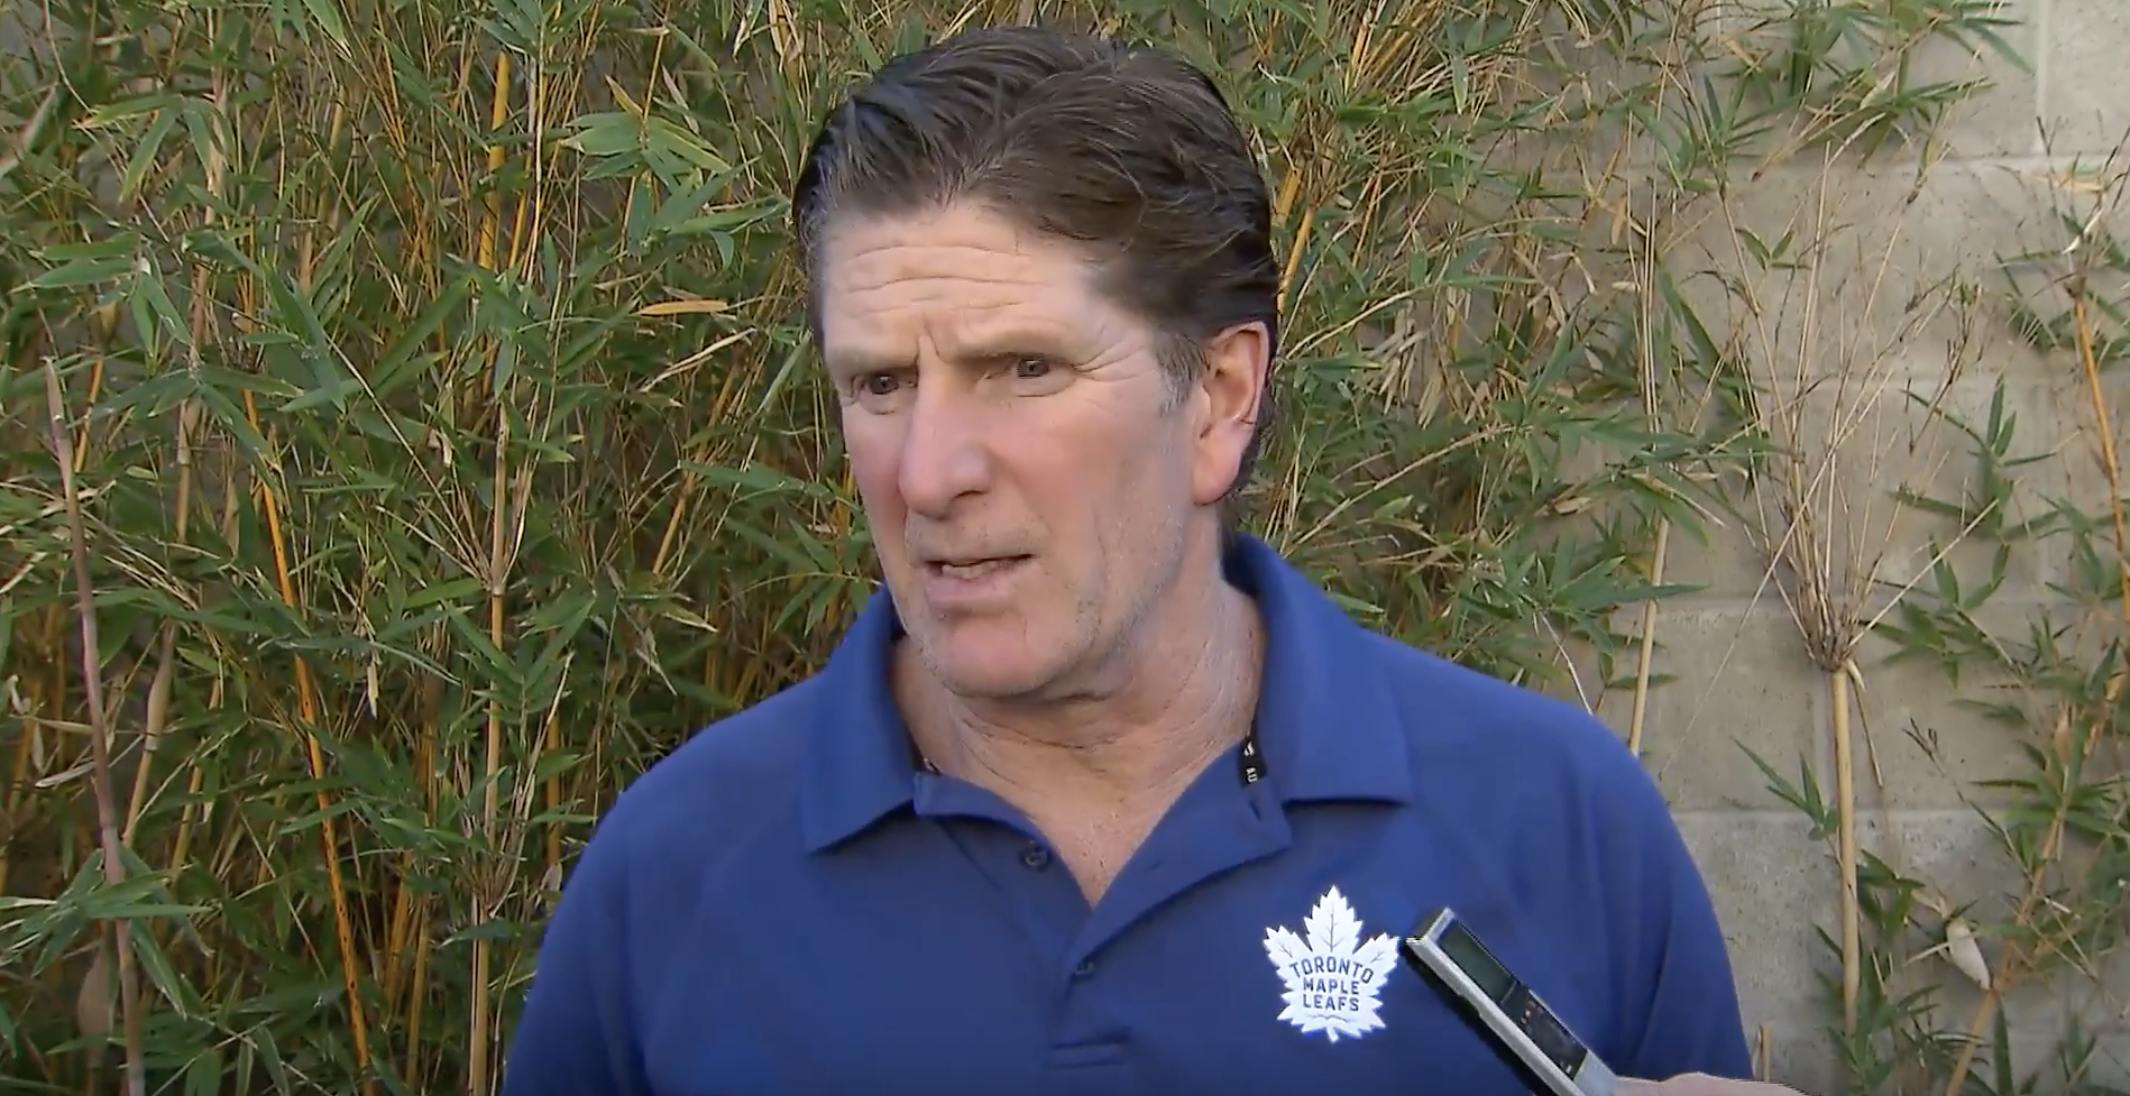 Mike Babcock of the Toronto Maple Leafs